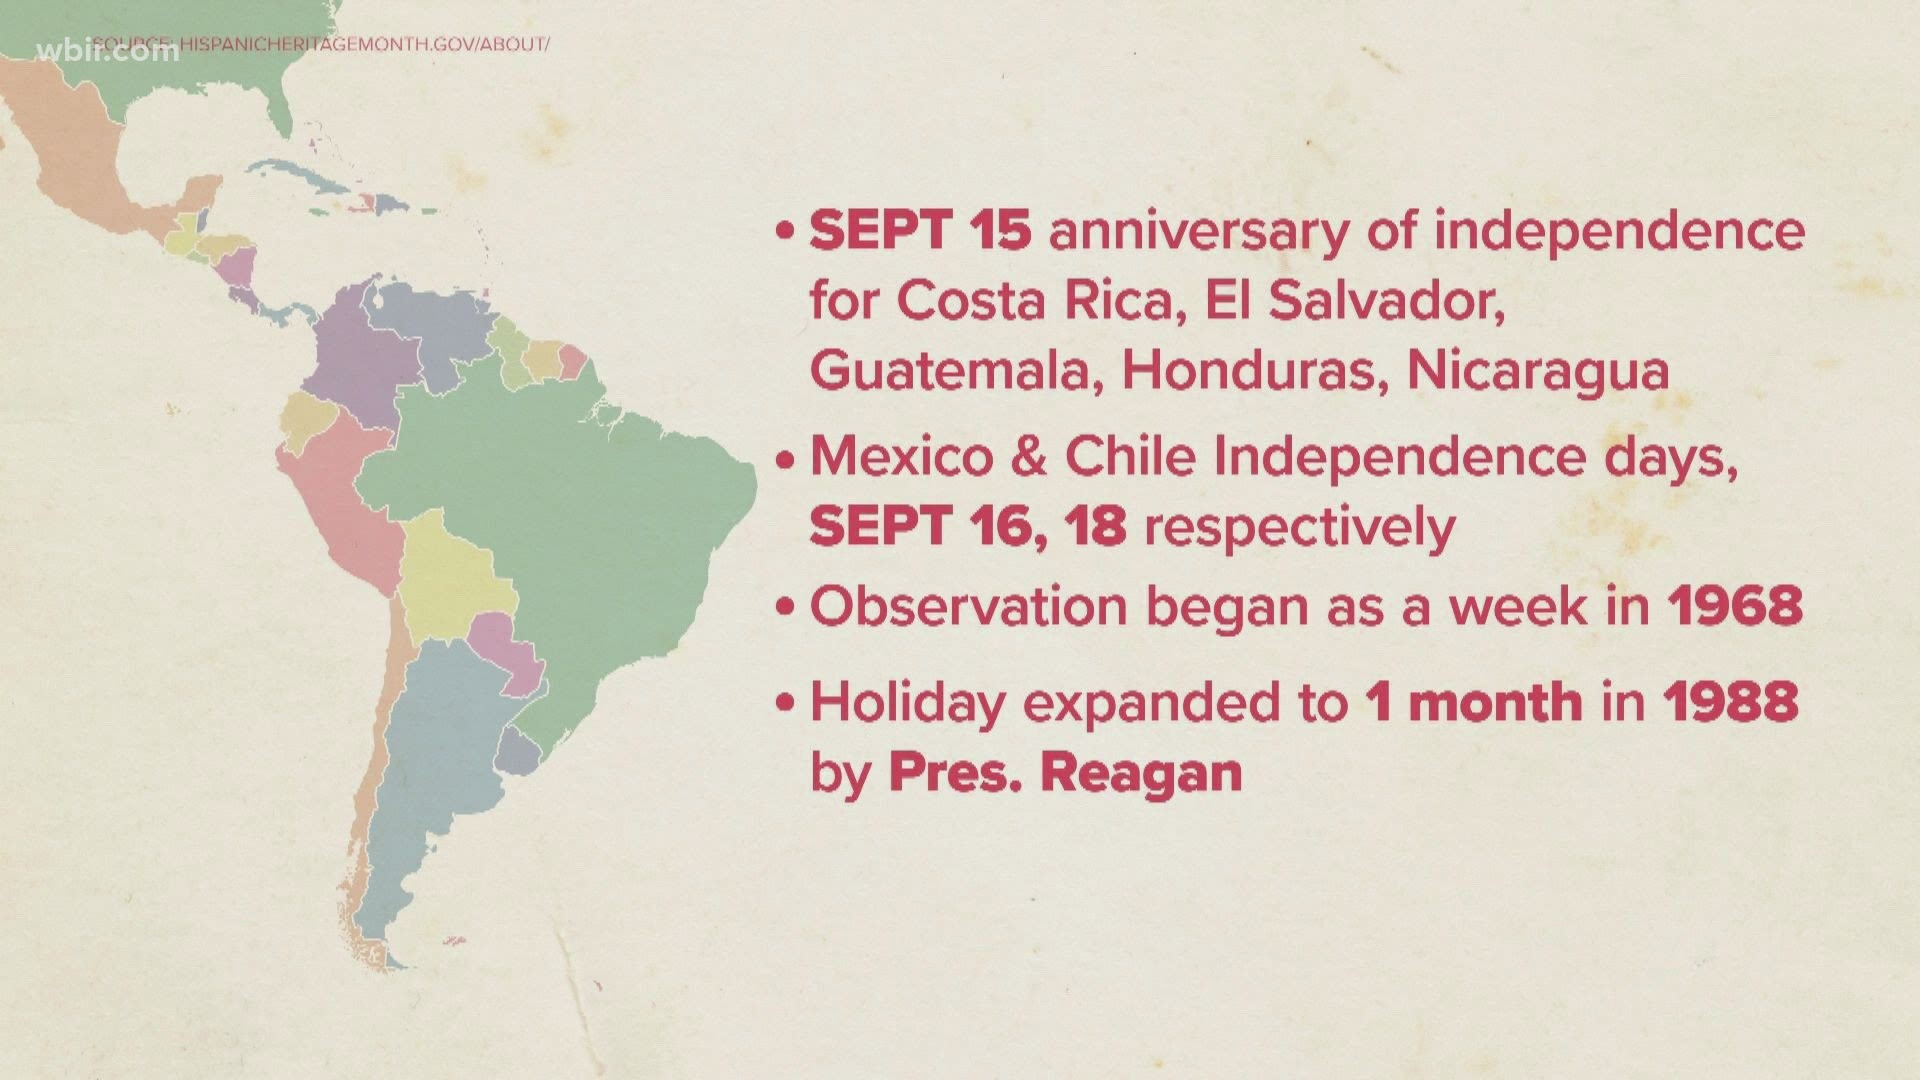 We'll be celebrating and highlighting our Hispanic and Latinx communities in East Tennessee.